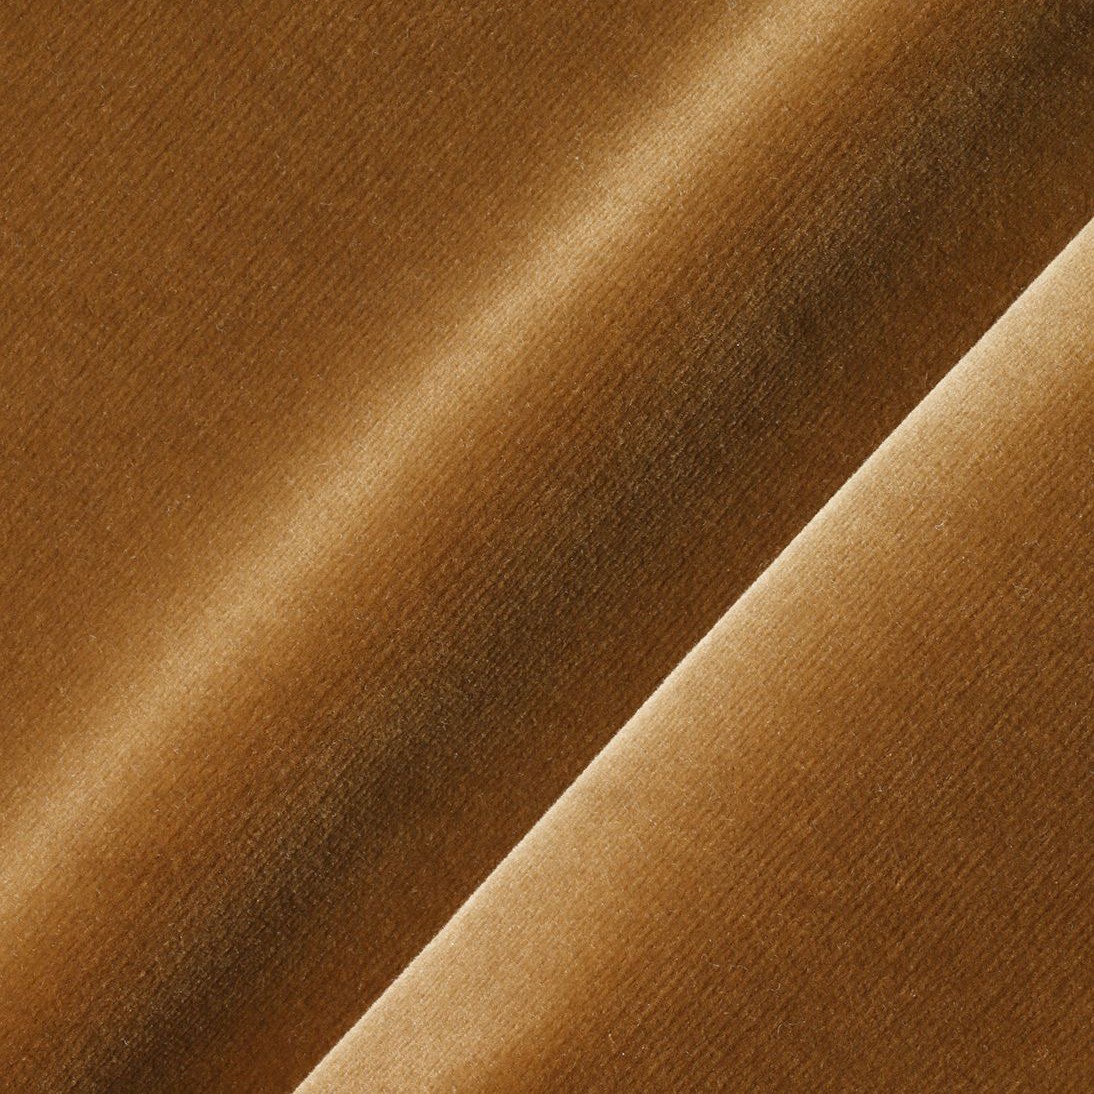 The image of an Rose Uniacke Cotton Velvet in Gingerbread product